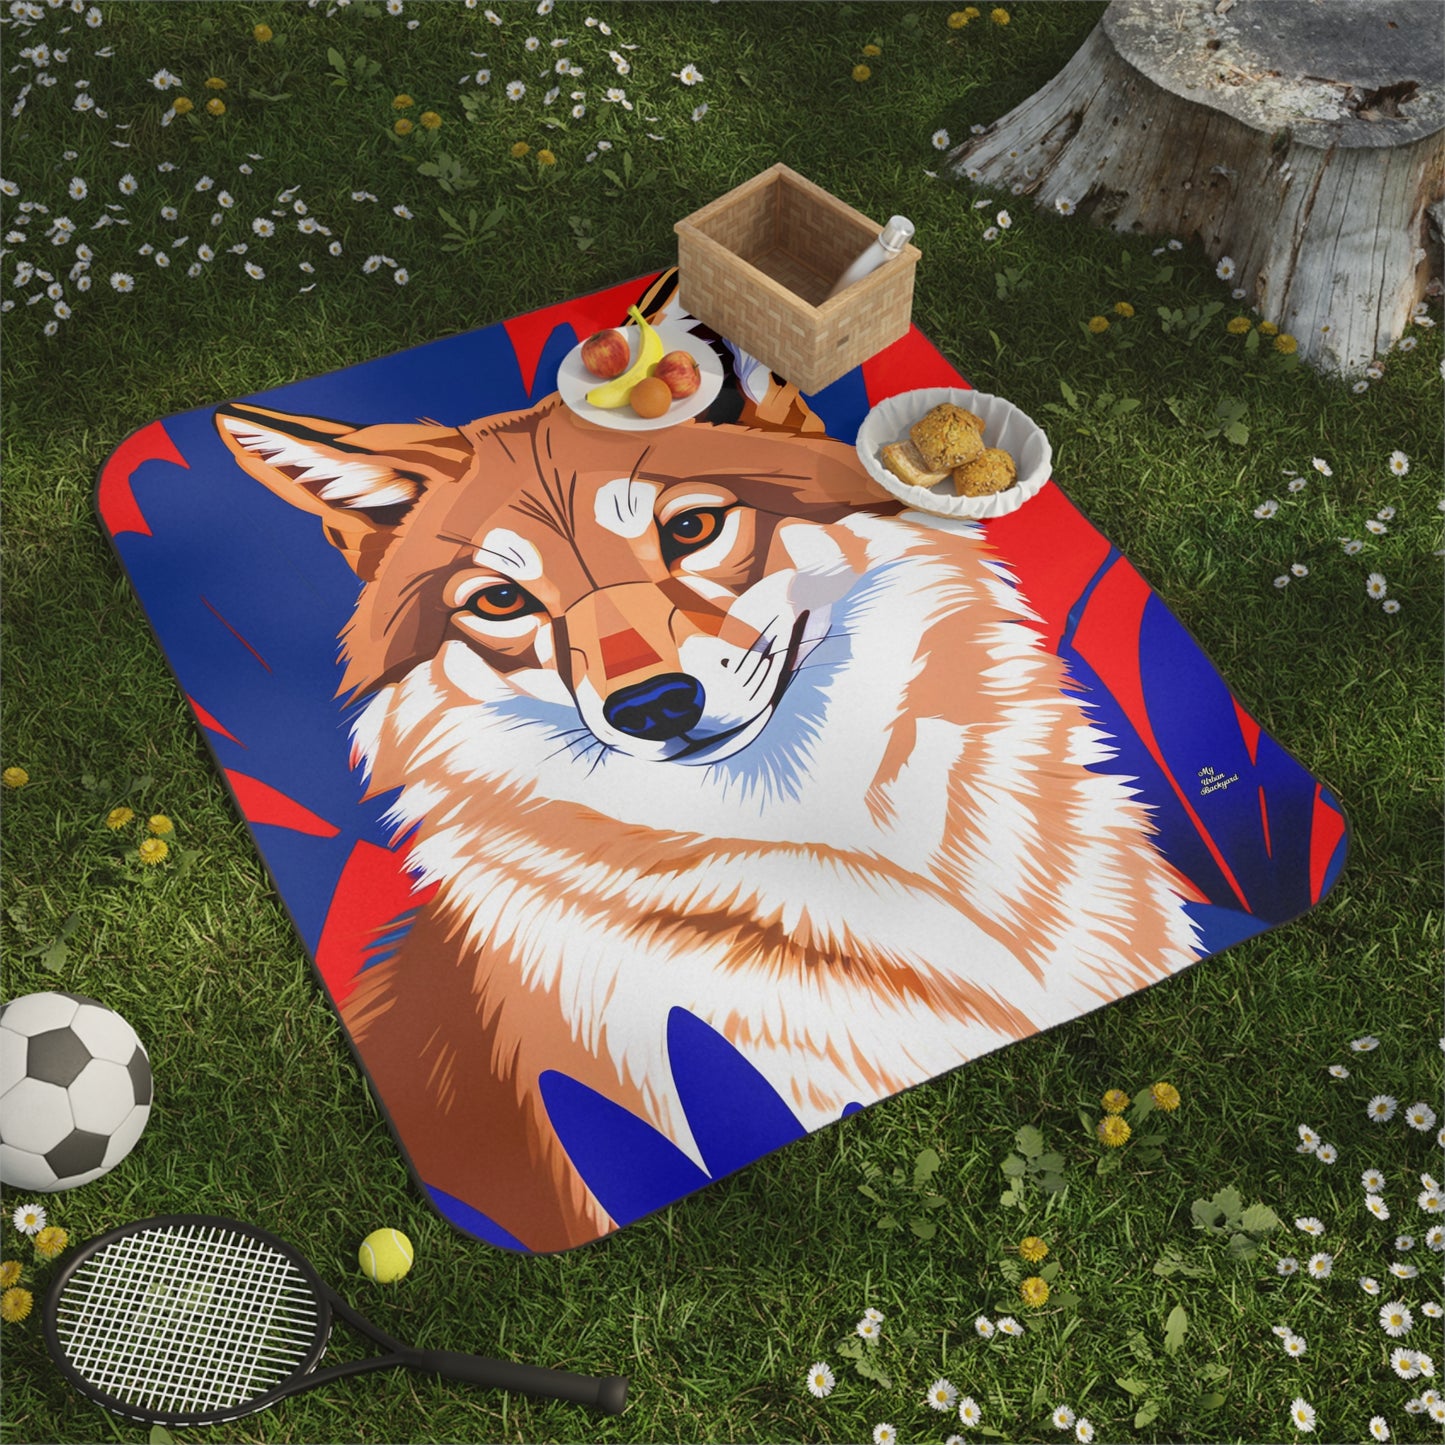 Outdoor Picnic Blanket with Soft Fleece Top and Water-Resistant Bottom - Coyote on Blue and Red